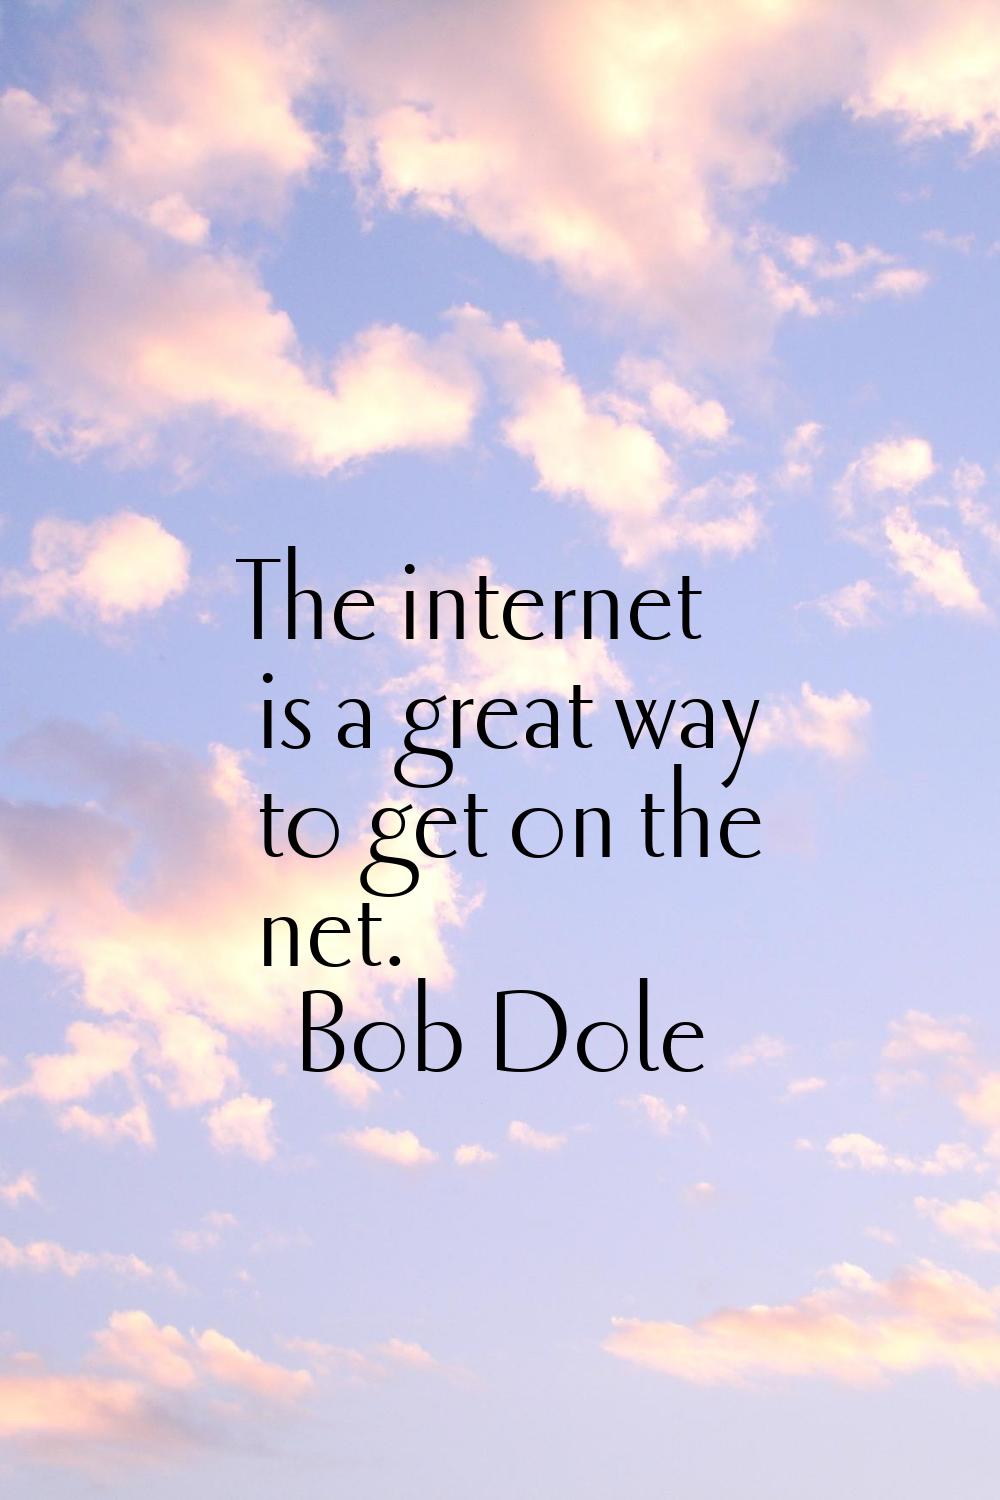 The internet is a great way to get on the net.